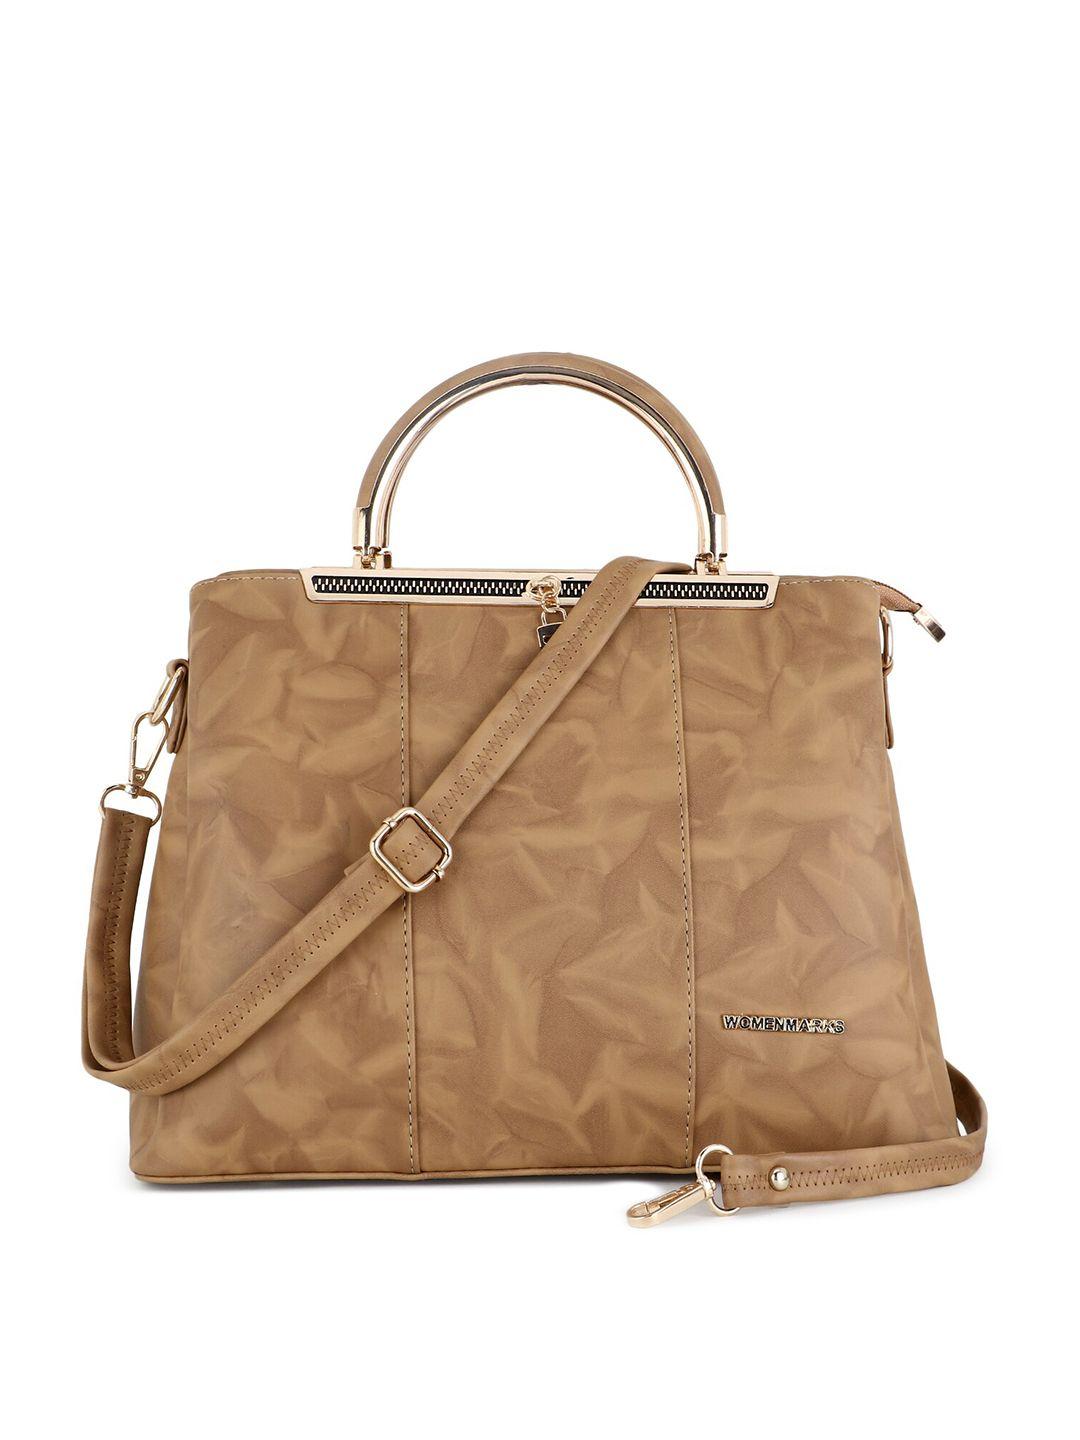 women-marks-tan-pu-structured-handheld-bag-with-tasselled